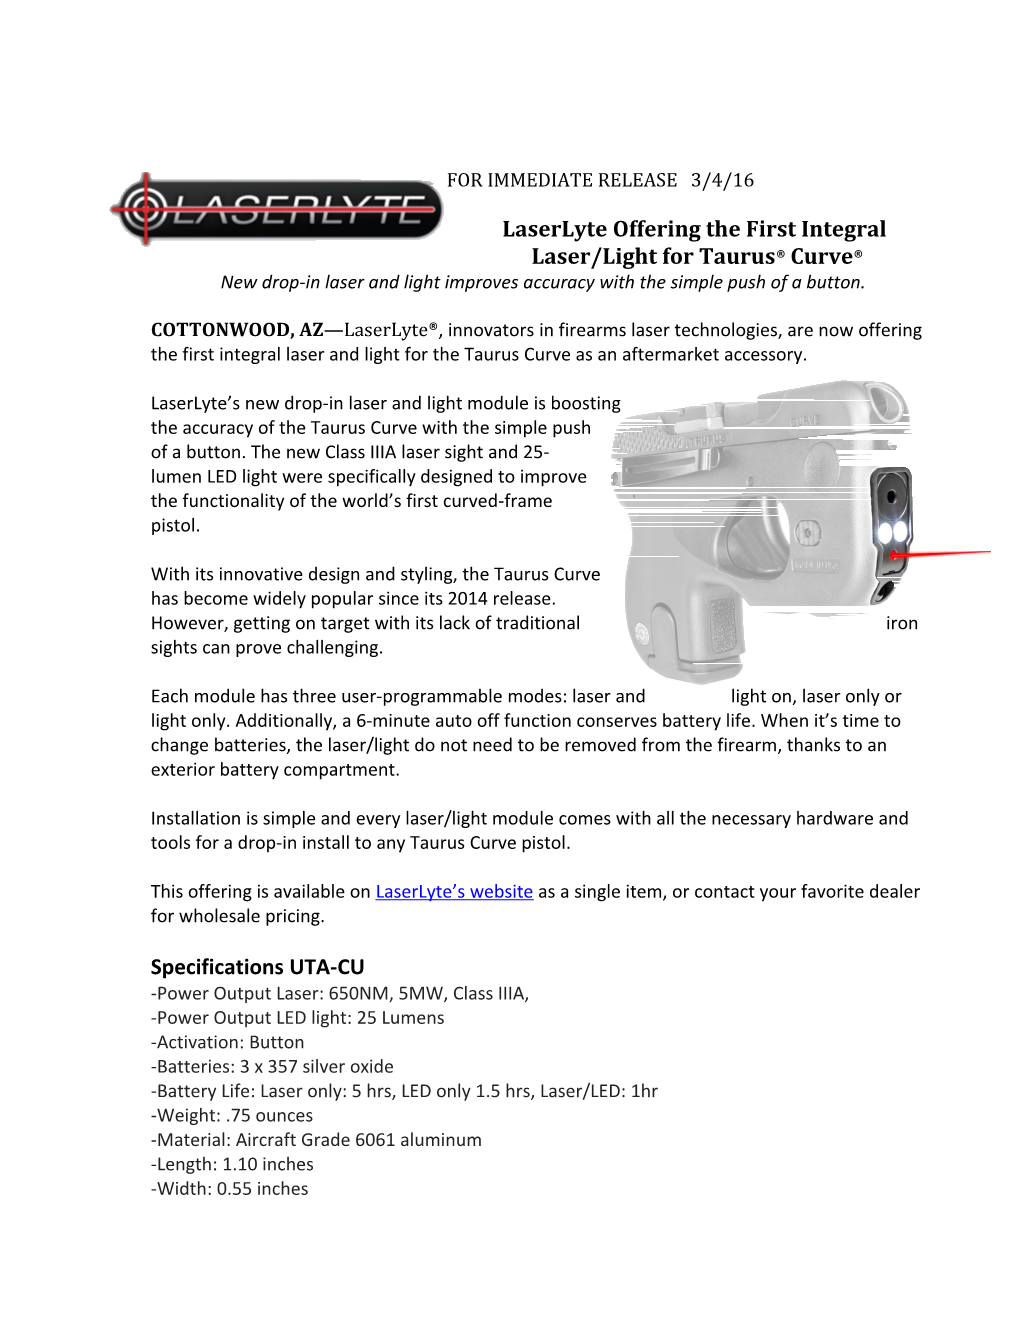 Laserlyte Offering the First Integral Laser/Light for Taurus Curve